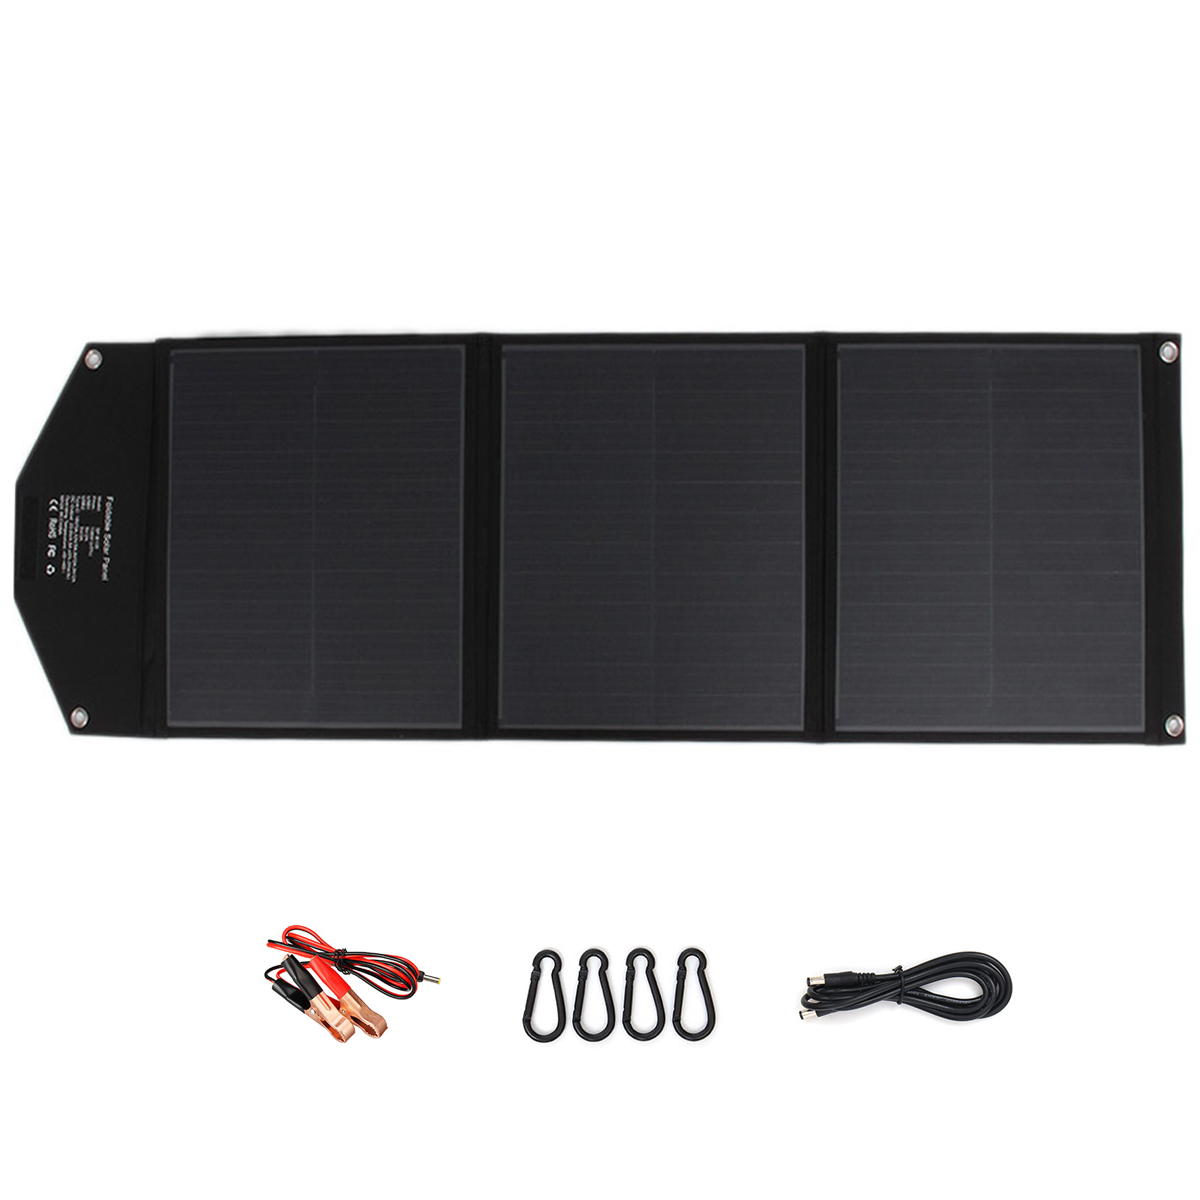 iMars SP-B100 100W 19V Solar Panel Outdoor Waterproof Superior Monocrystalline Solar Power Cell Battery Charger for Car